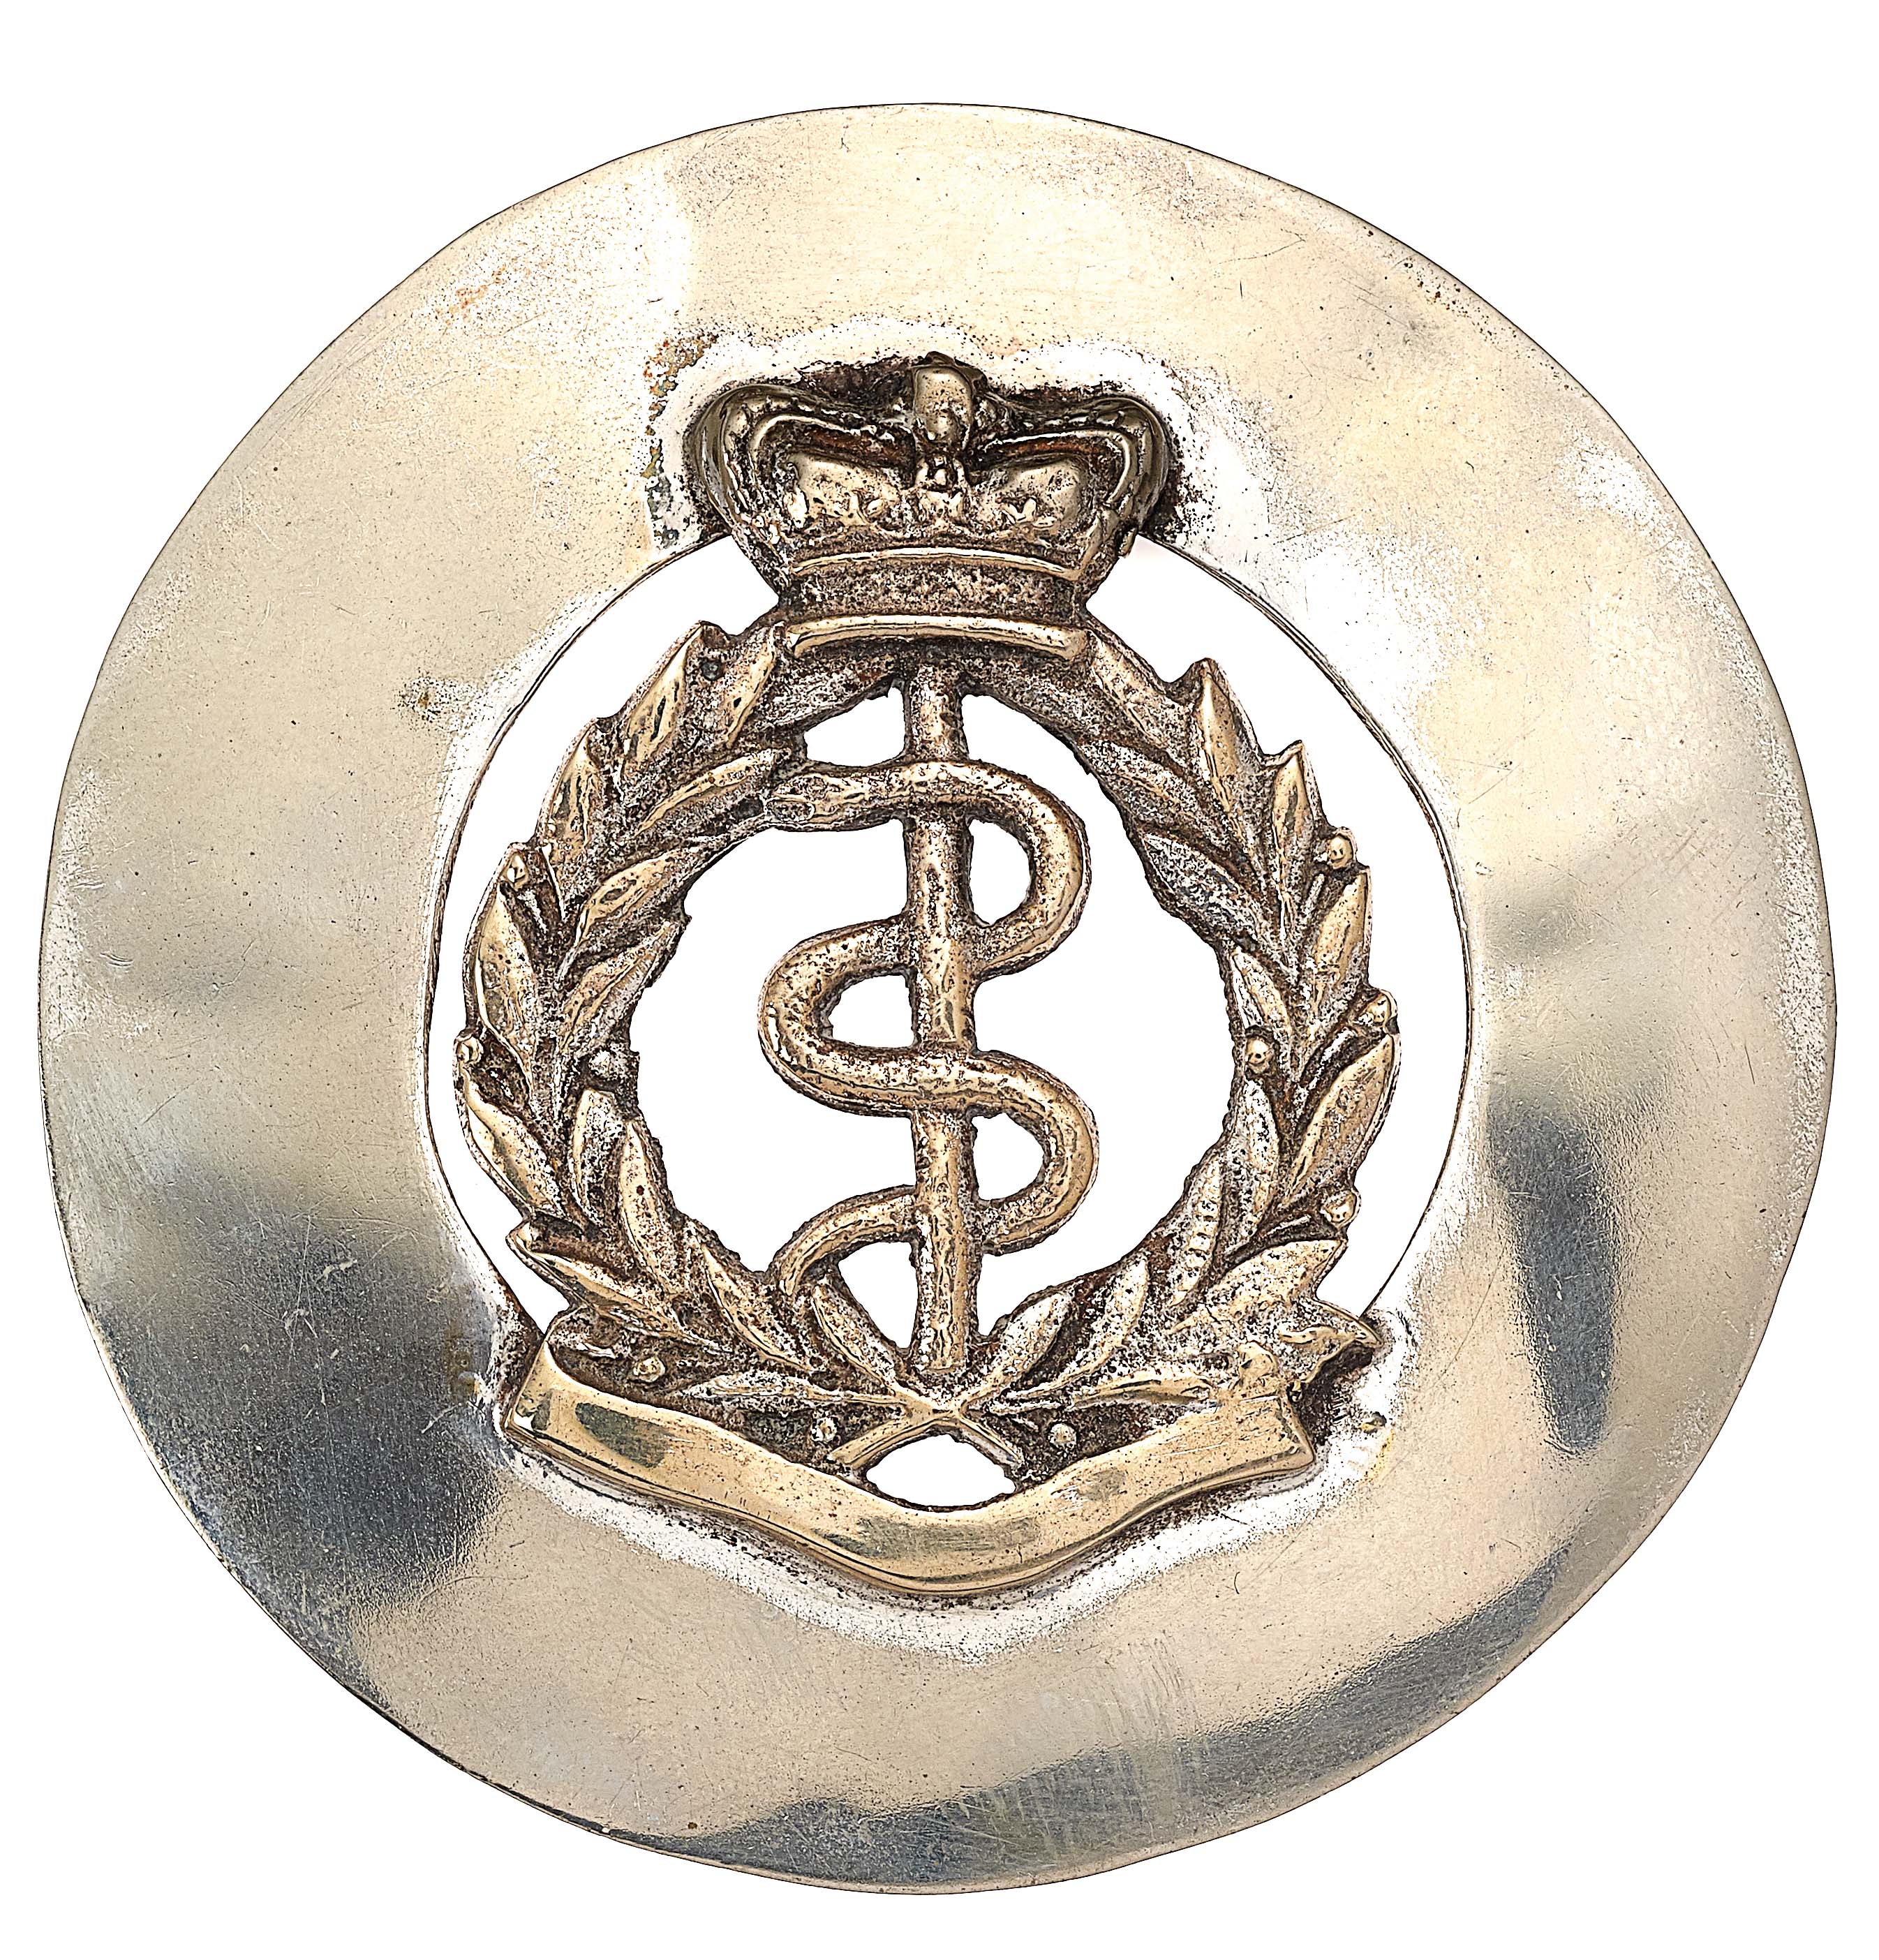 Royal Army Medical Corps piper’s glengarry badge by Lawrie, Glasgow.